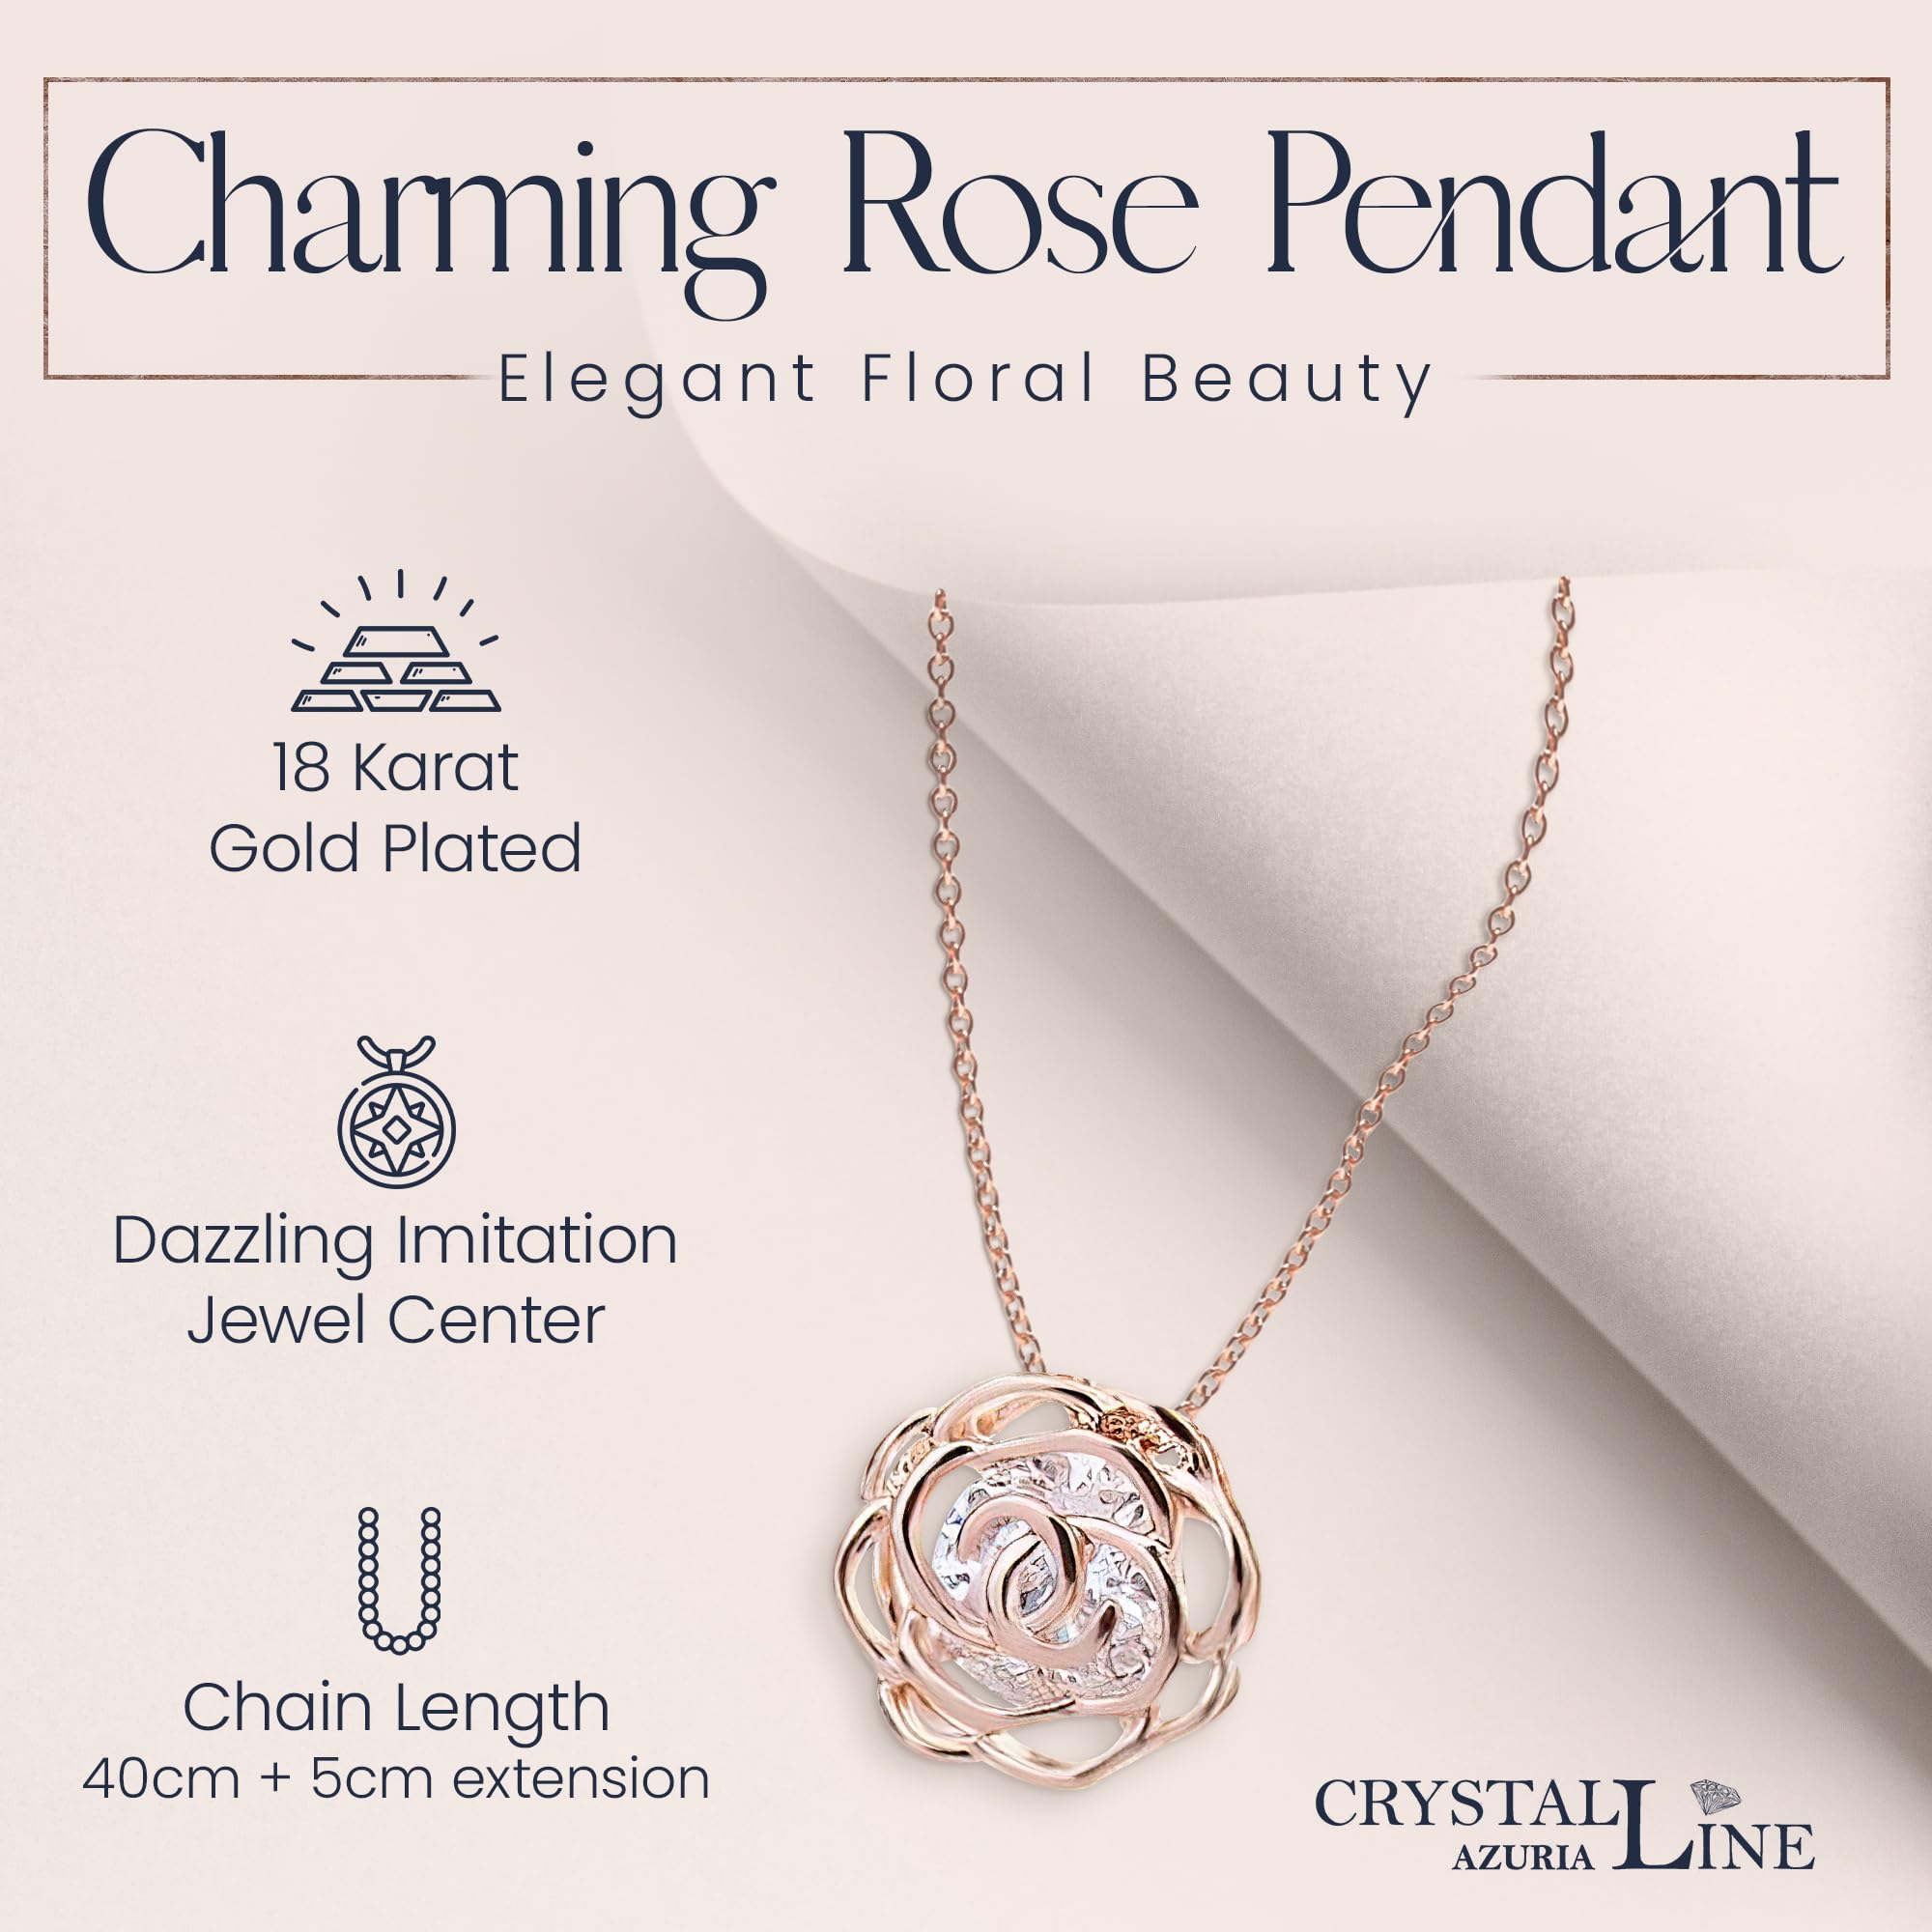 Crystalline Azuria Women 18ct White or Rose Gold Plated White Crystal Roses Flowers Necklace and Earrings Set for Women Wedding Party Bridal Bridesmaid Accessories